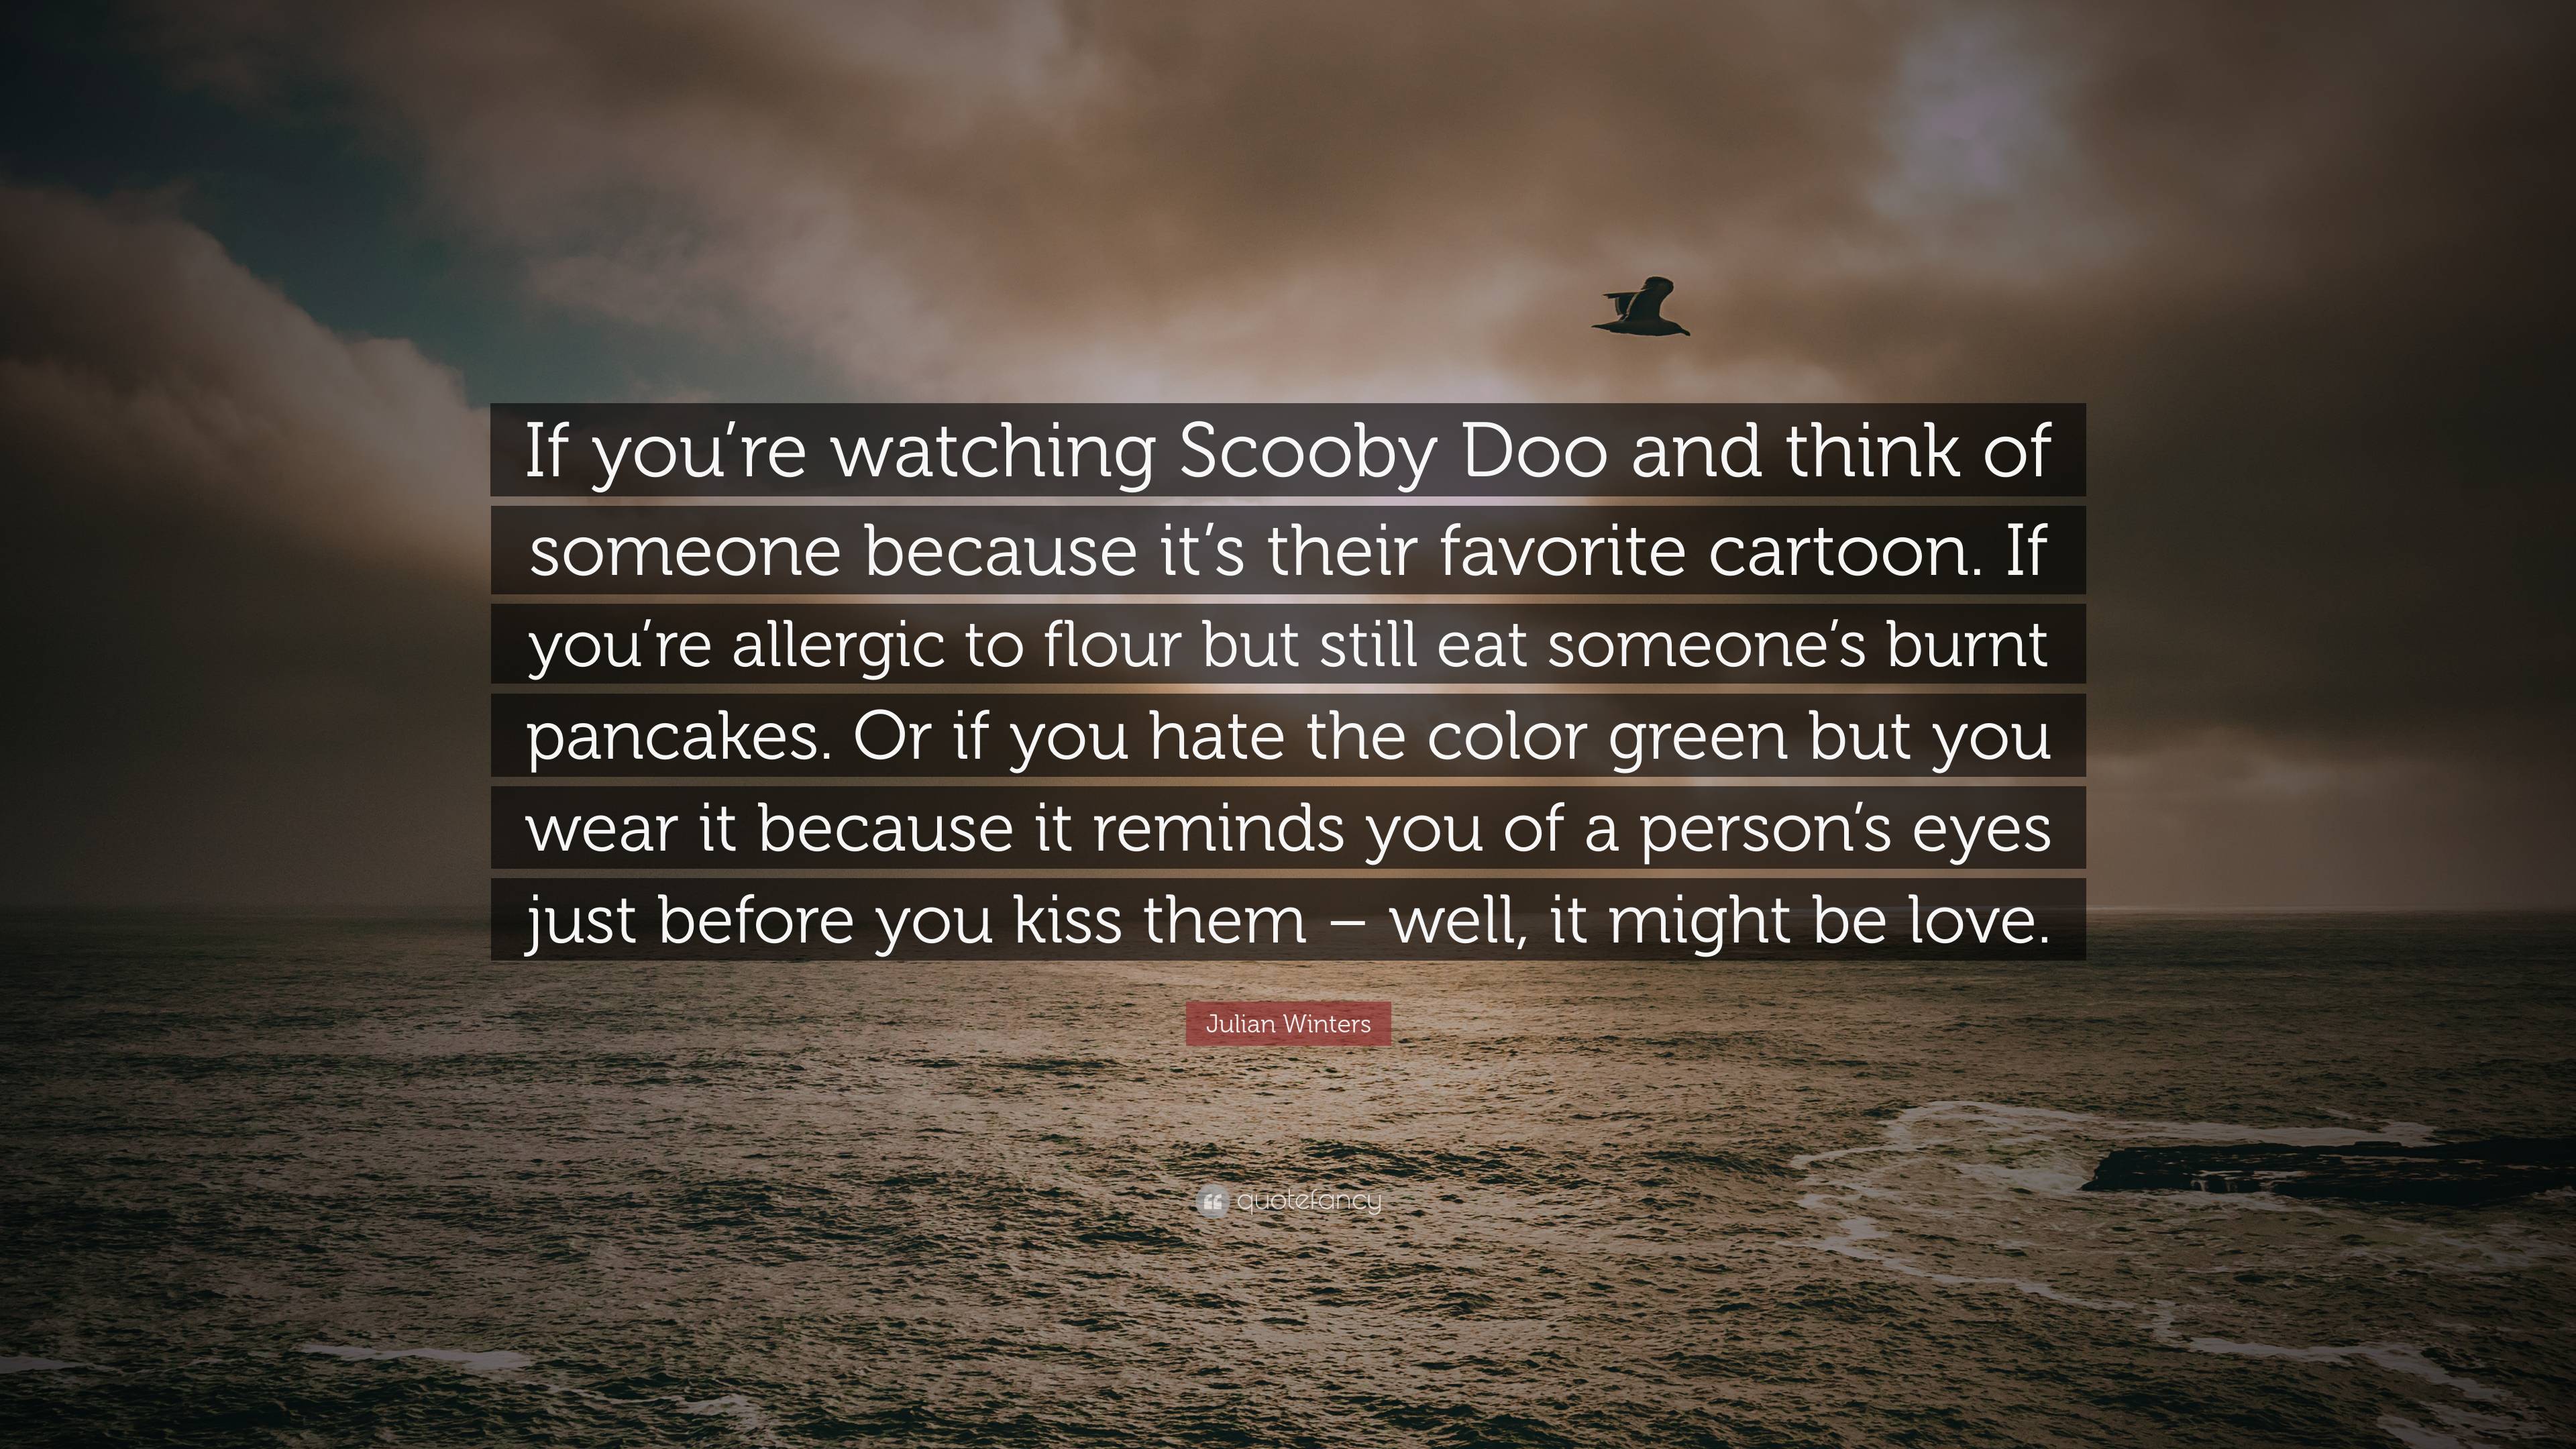 Julian Winters Quote: “If you’re watching Scooby Doo and think of ...